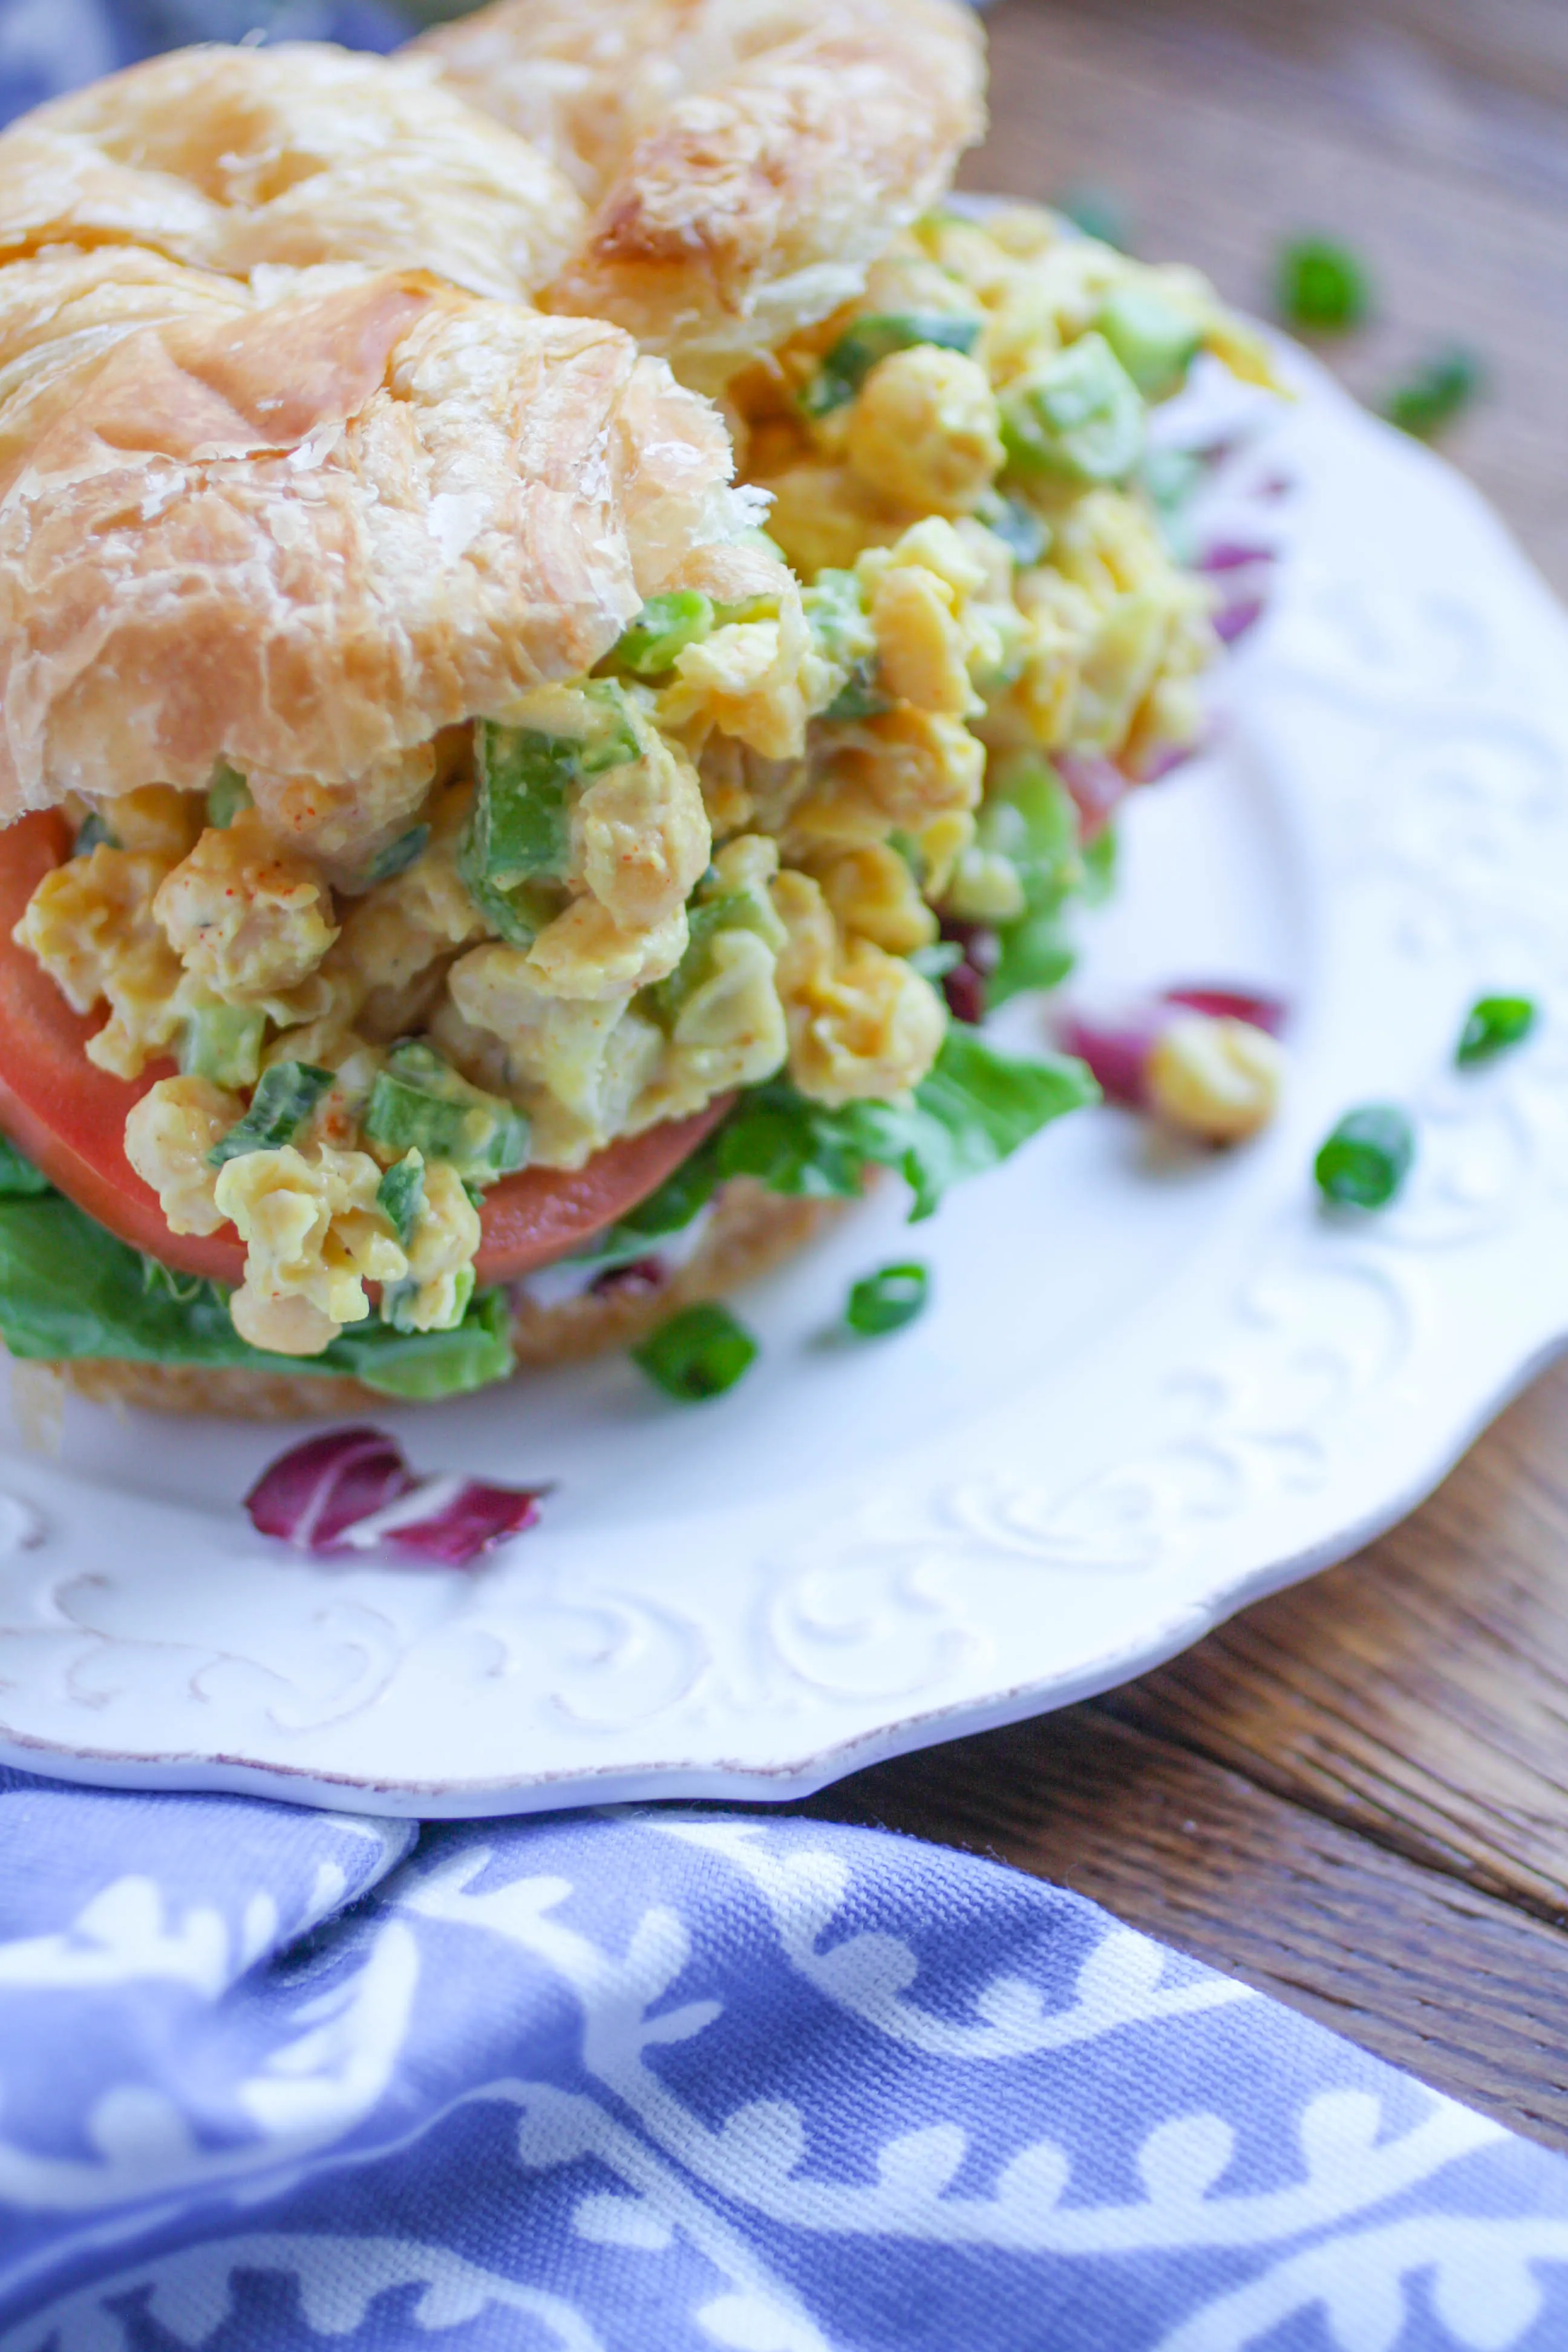 Chickpea Salad Sandwiches are great for lunch, for for a special event like a baby shower! You'll love these flavorful, filling vegetarian sandwiches.